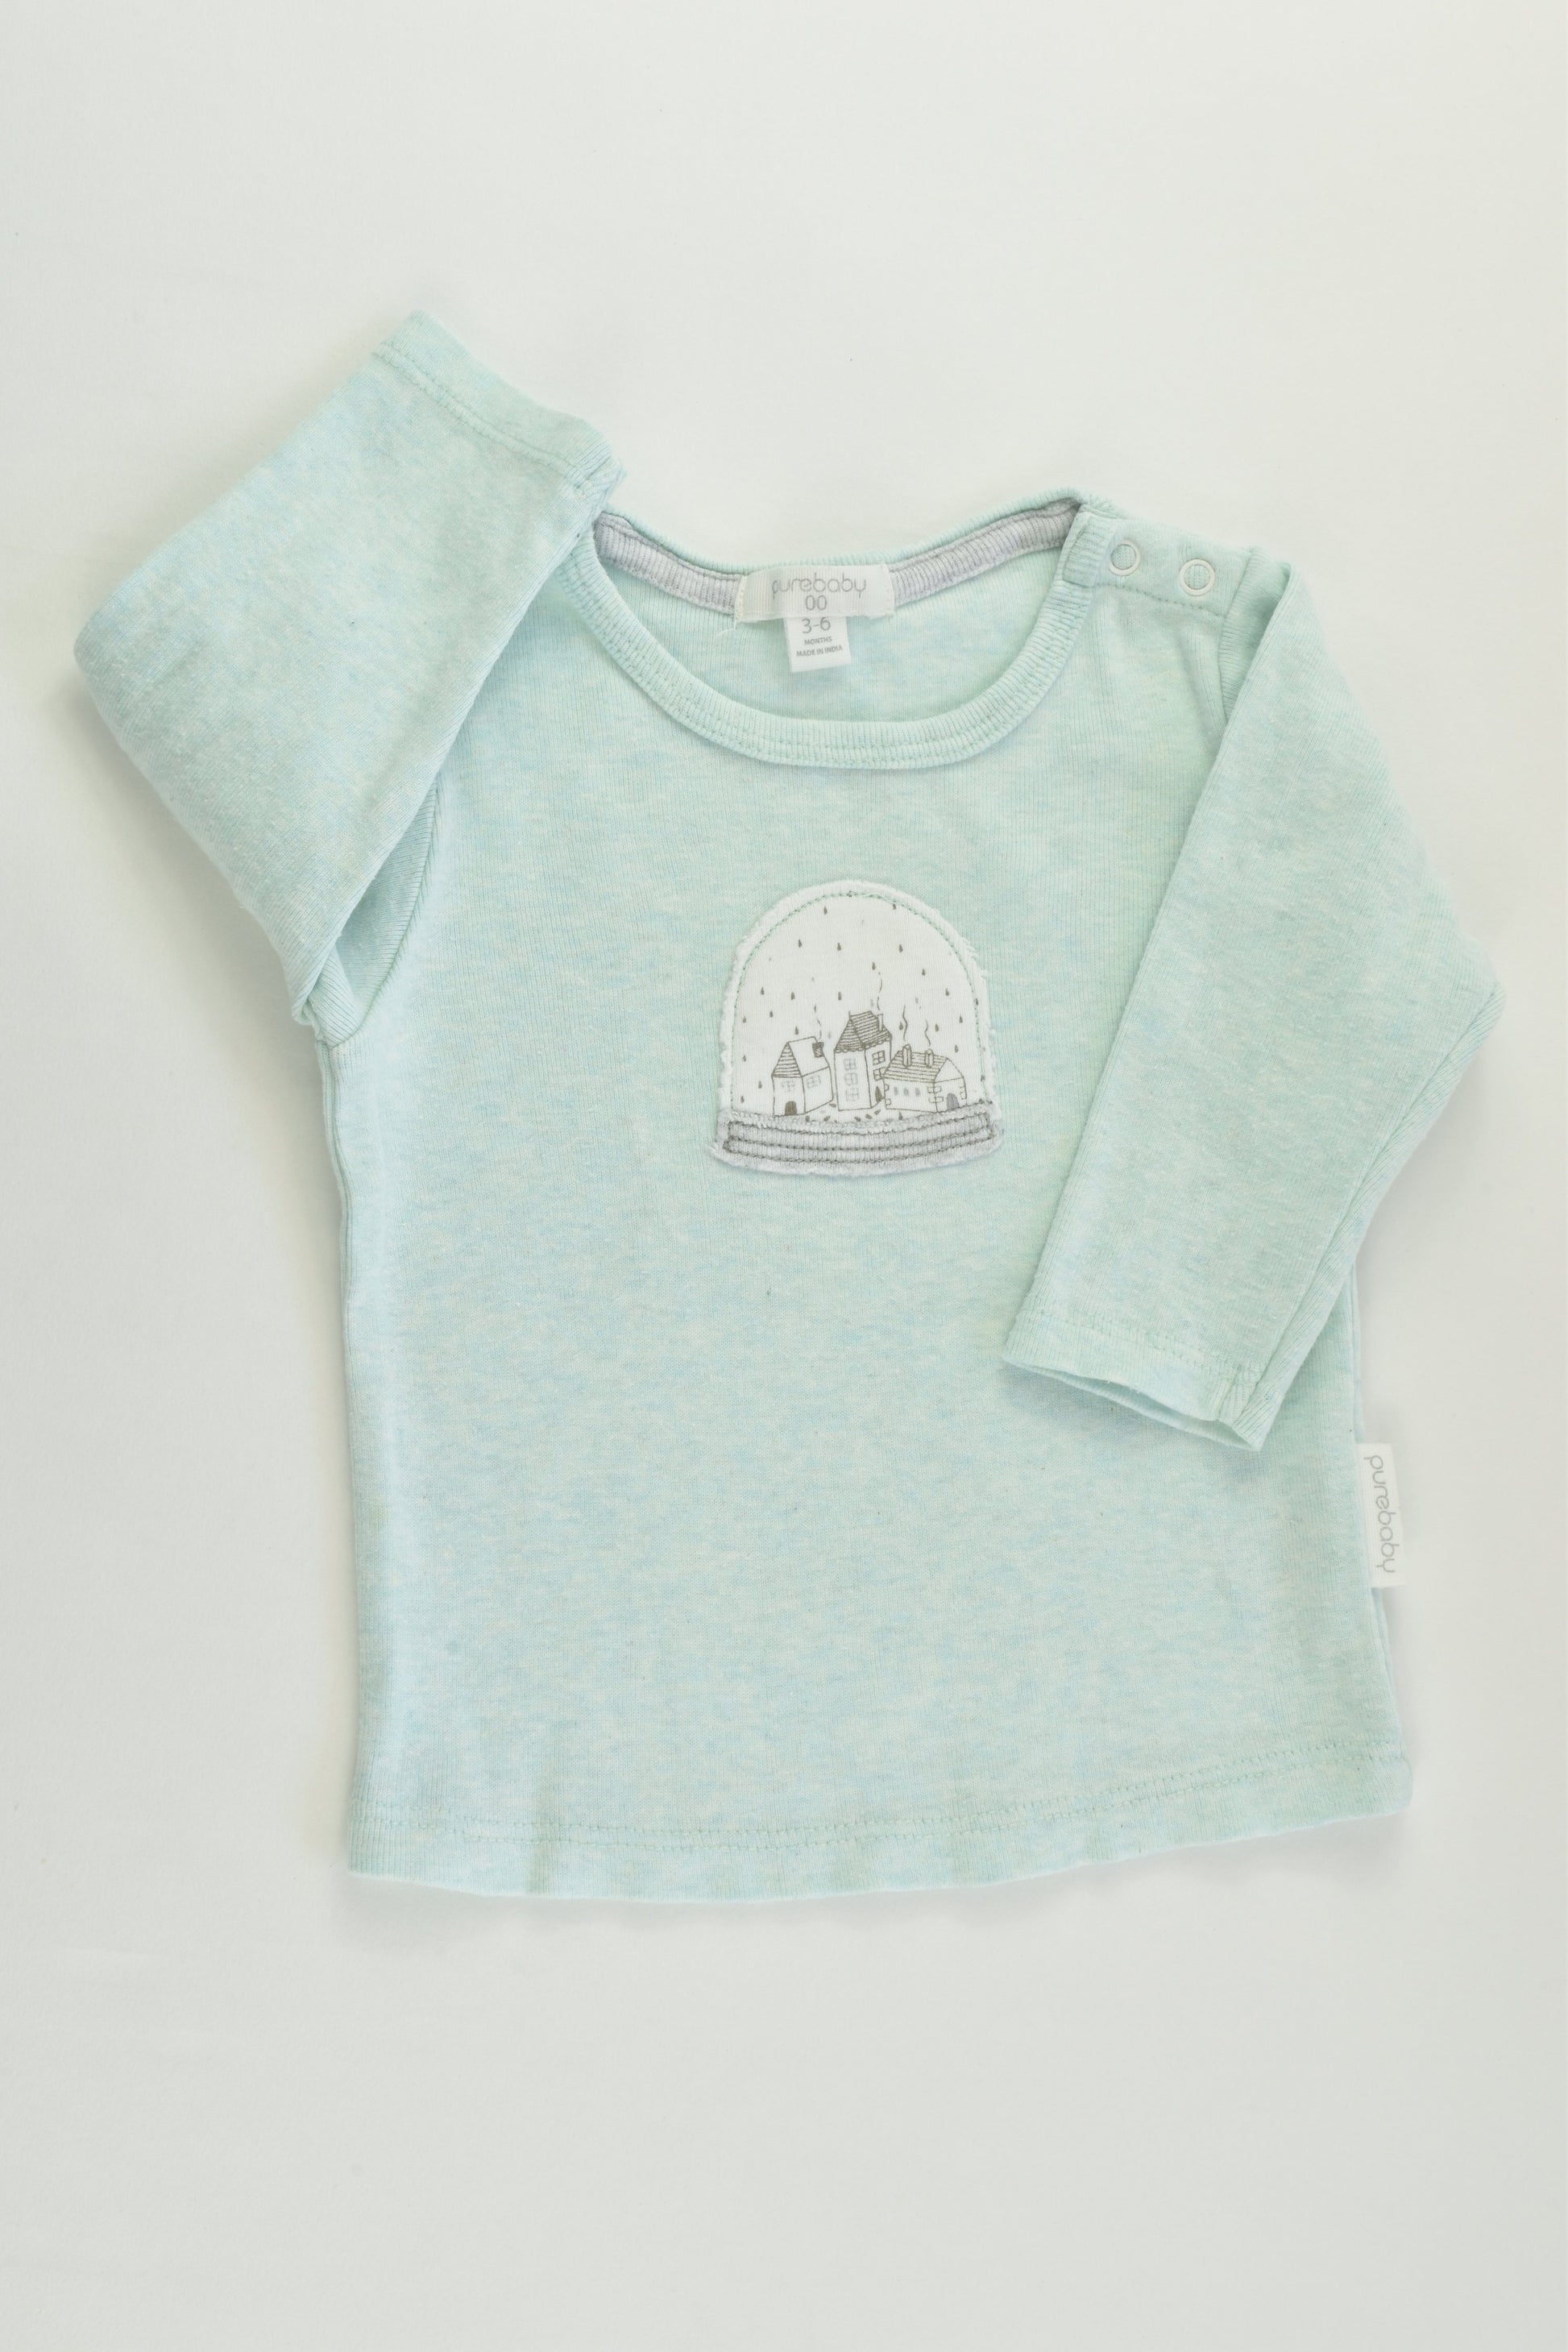 Purebaby Size 00 (3-6 months) Houses Top